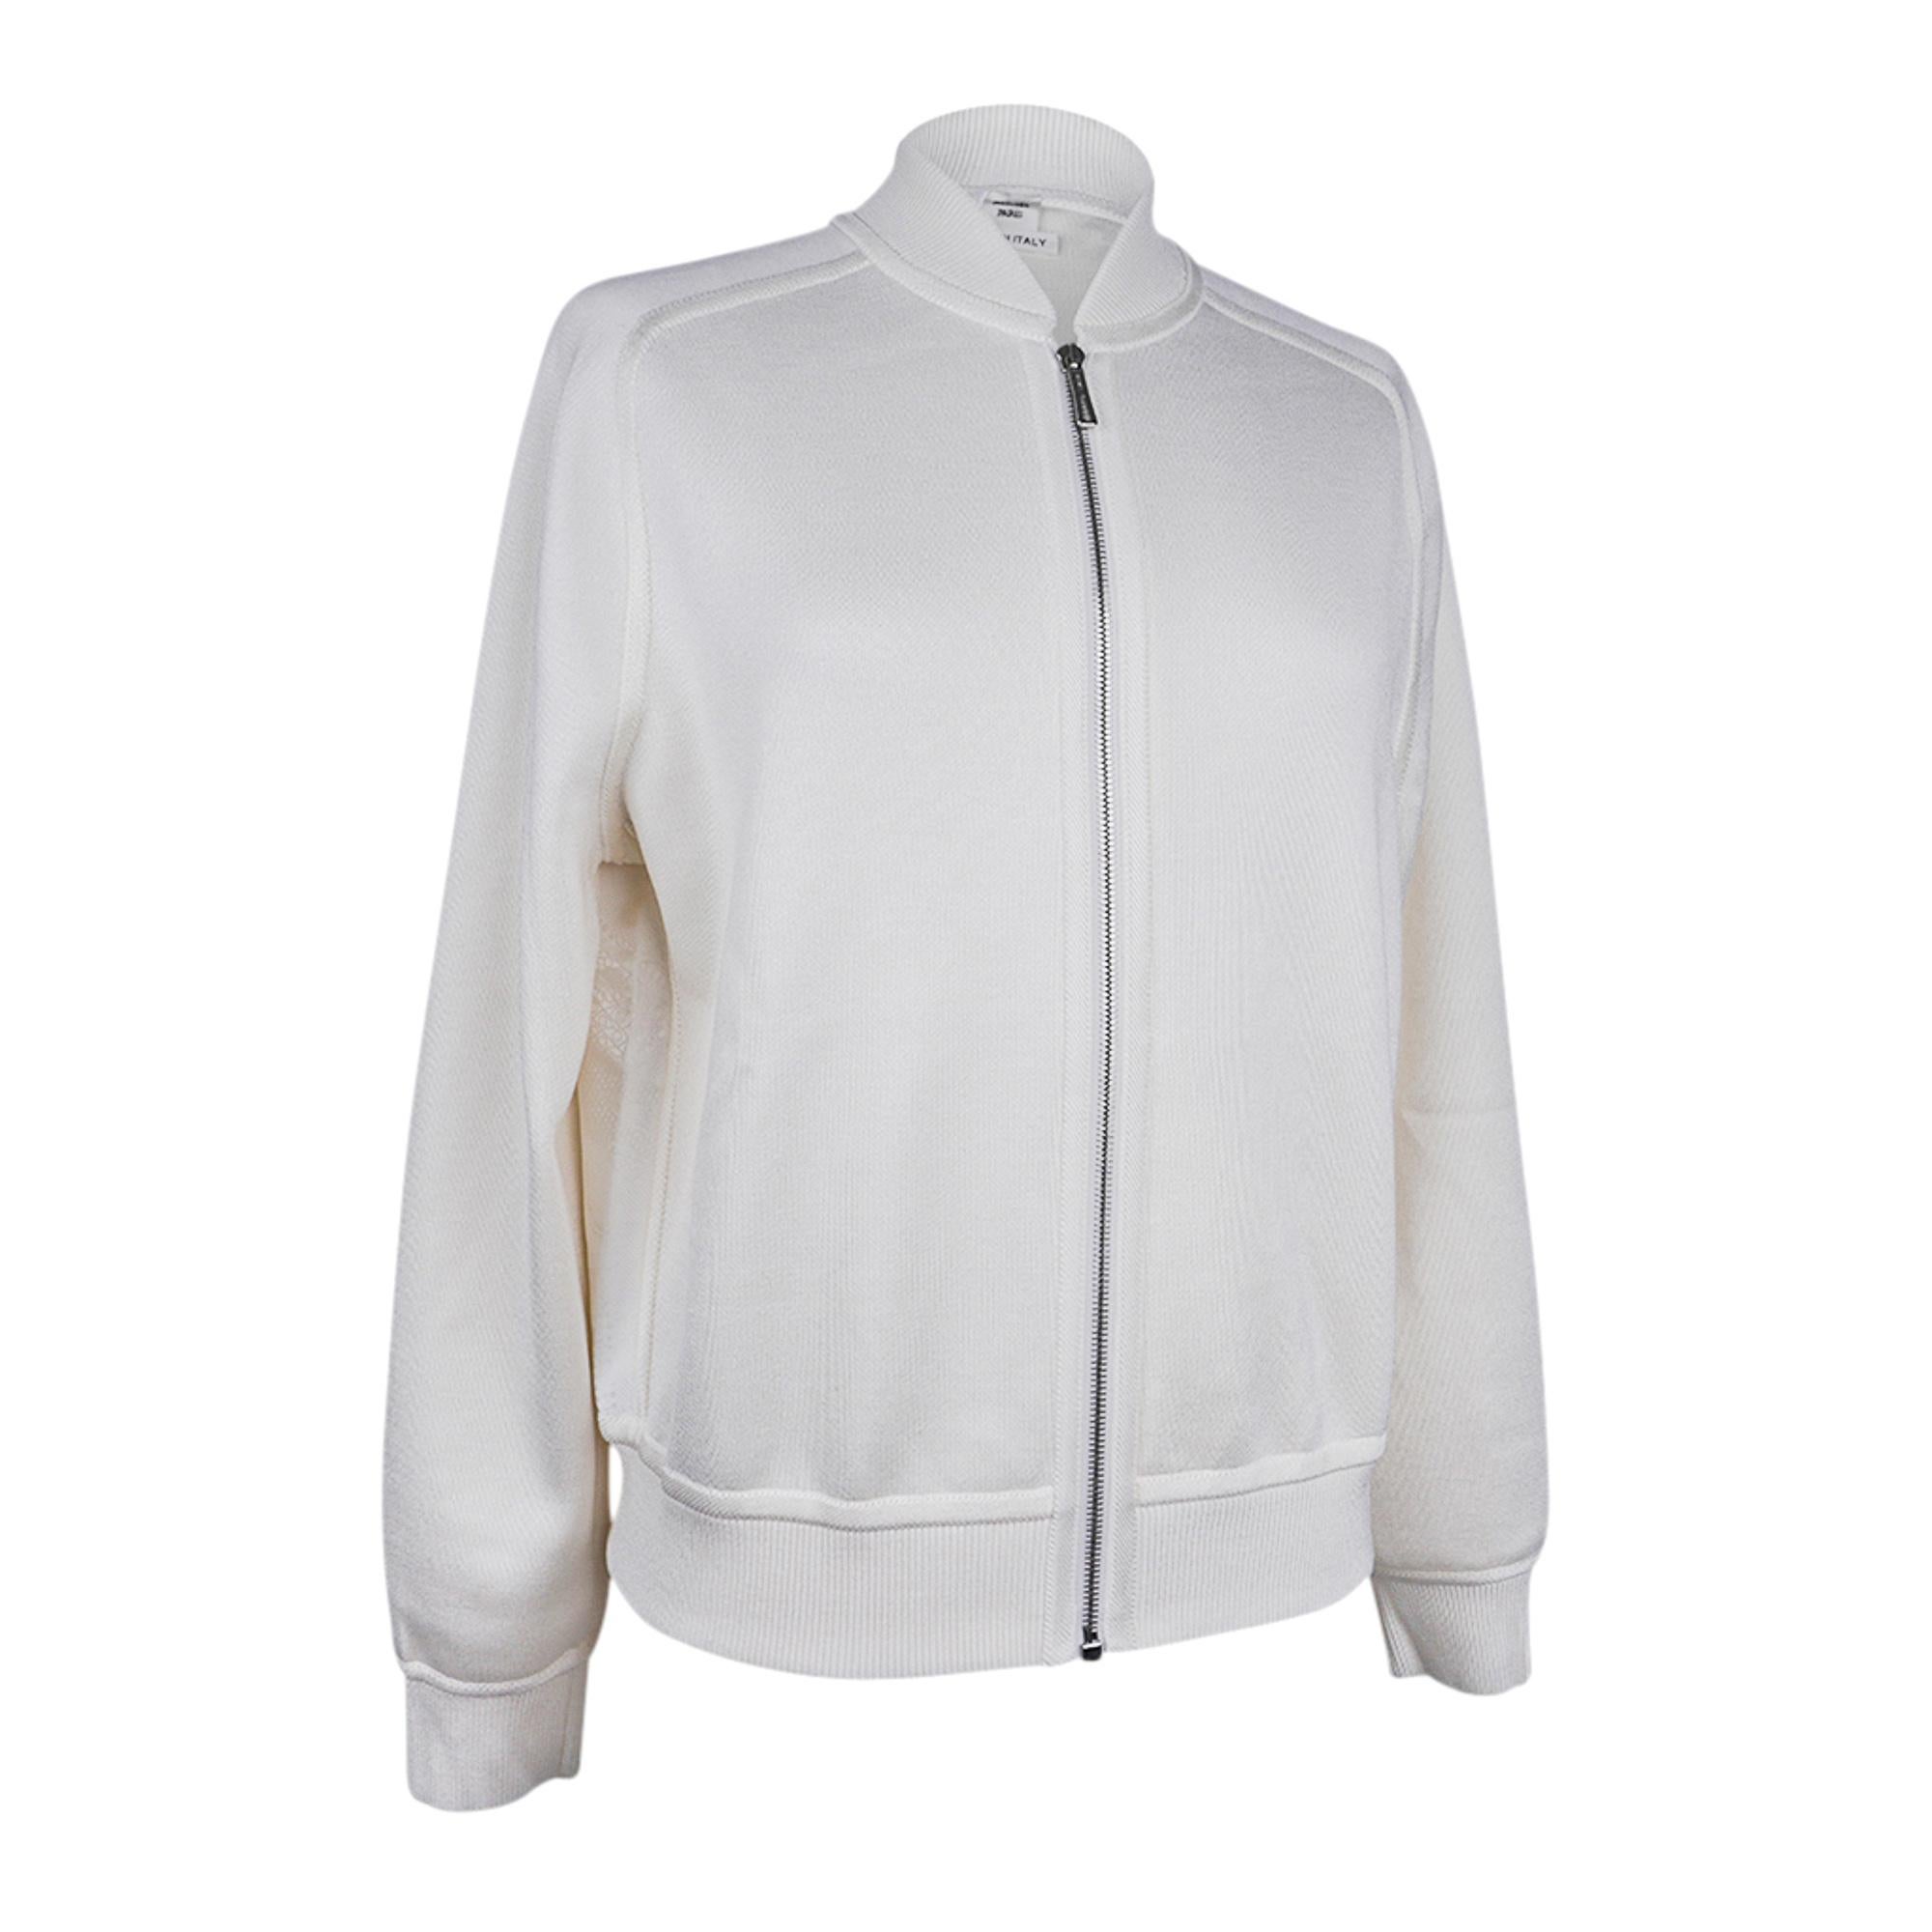 Hermes Cardigan Zip Clic Clac Winter White Jacket 38 / 6 For Sale 6